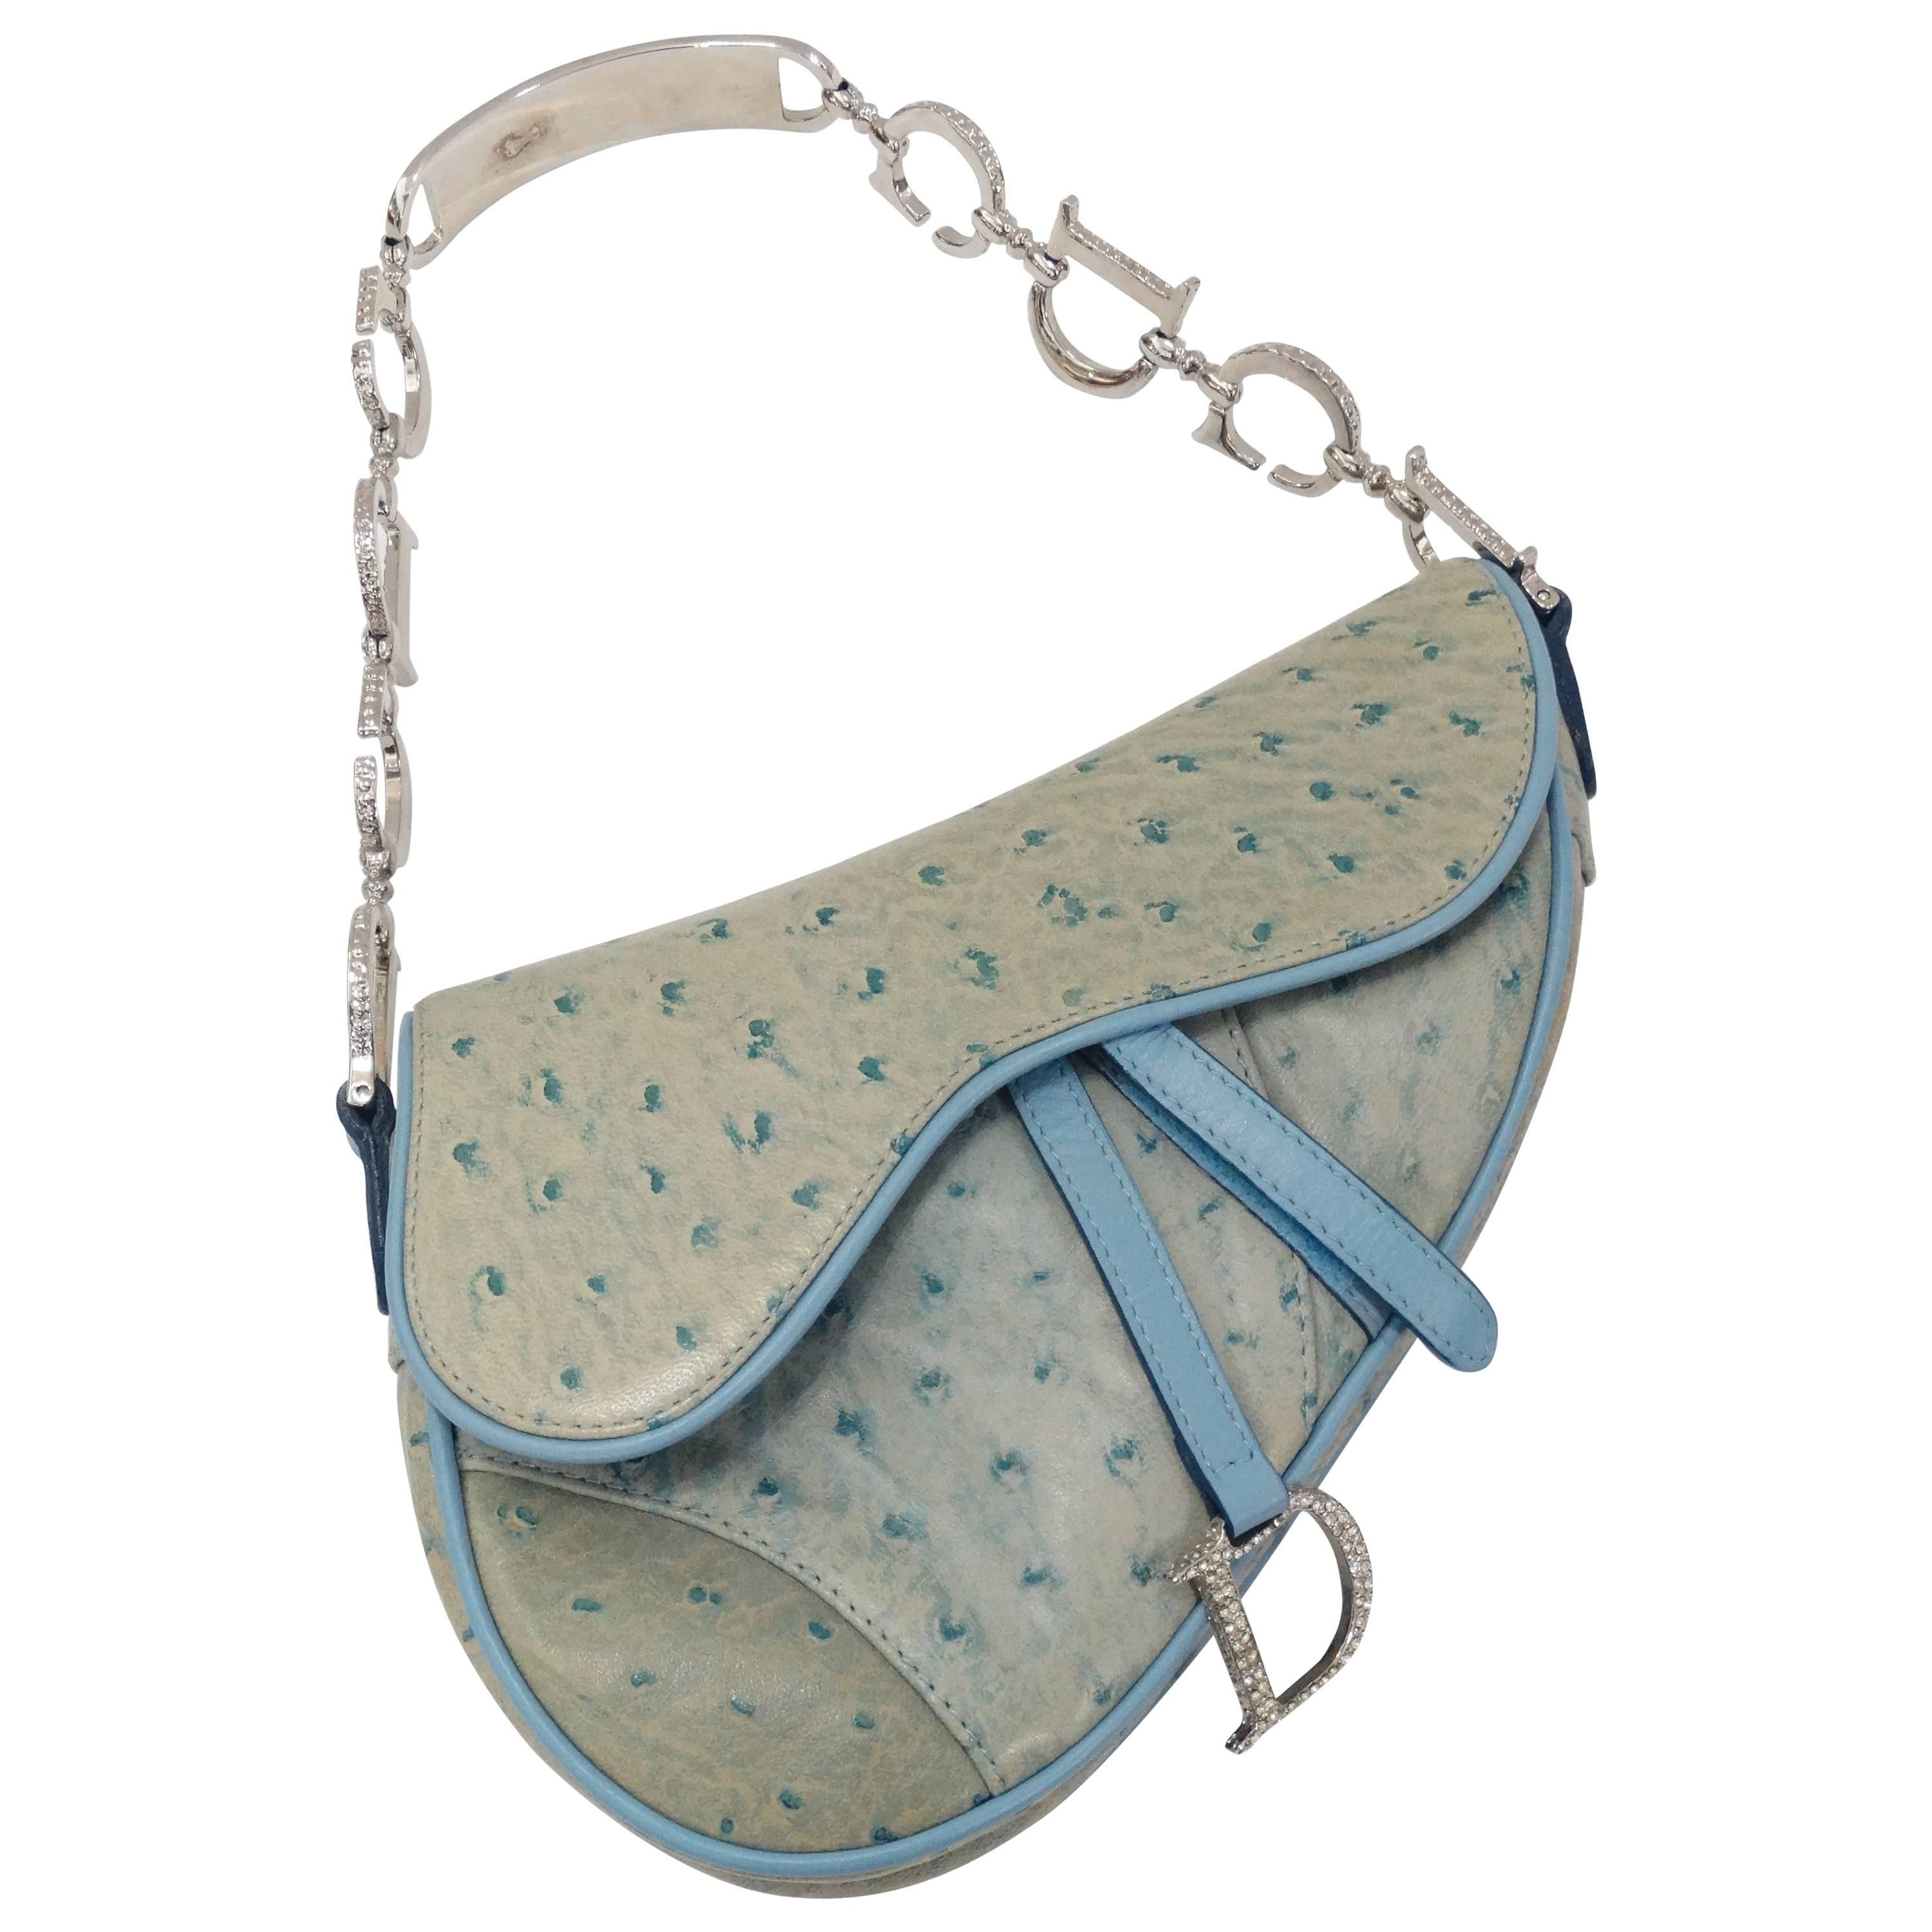 Christian Dior Pastel Blue 'Saddle' Bag in Ostrich with Rhinestone CD Hardware